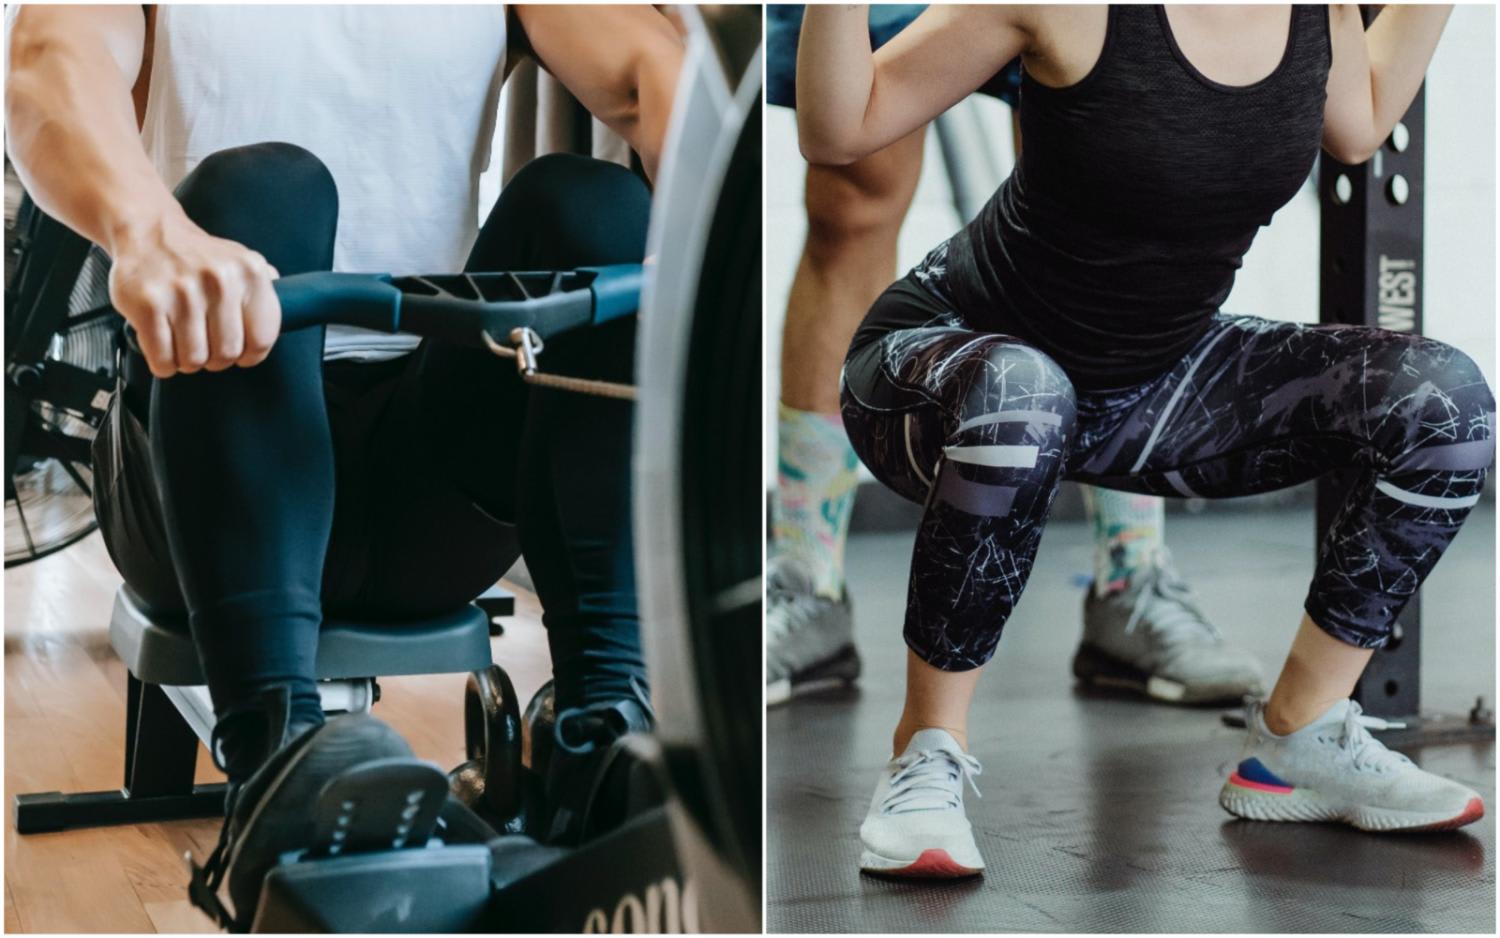 Sitting for long on a rowing machine places prolonged pressure on the veins near the rectum. Straining, improper form and breathing while lifting weights could cause the veins near the anus to become swollen as well, developing painful haemorrhoids. 